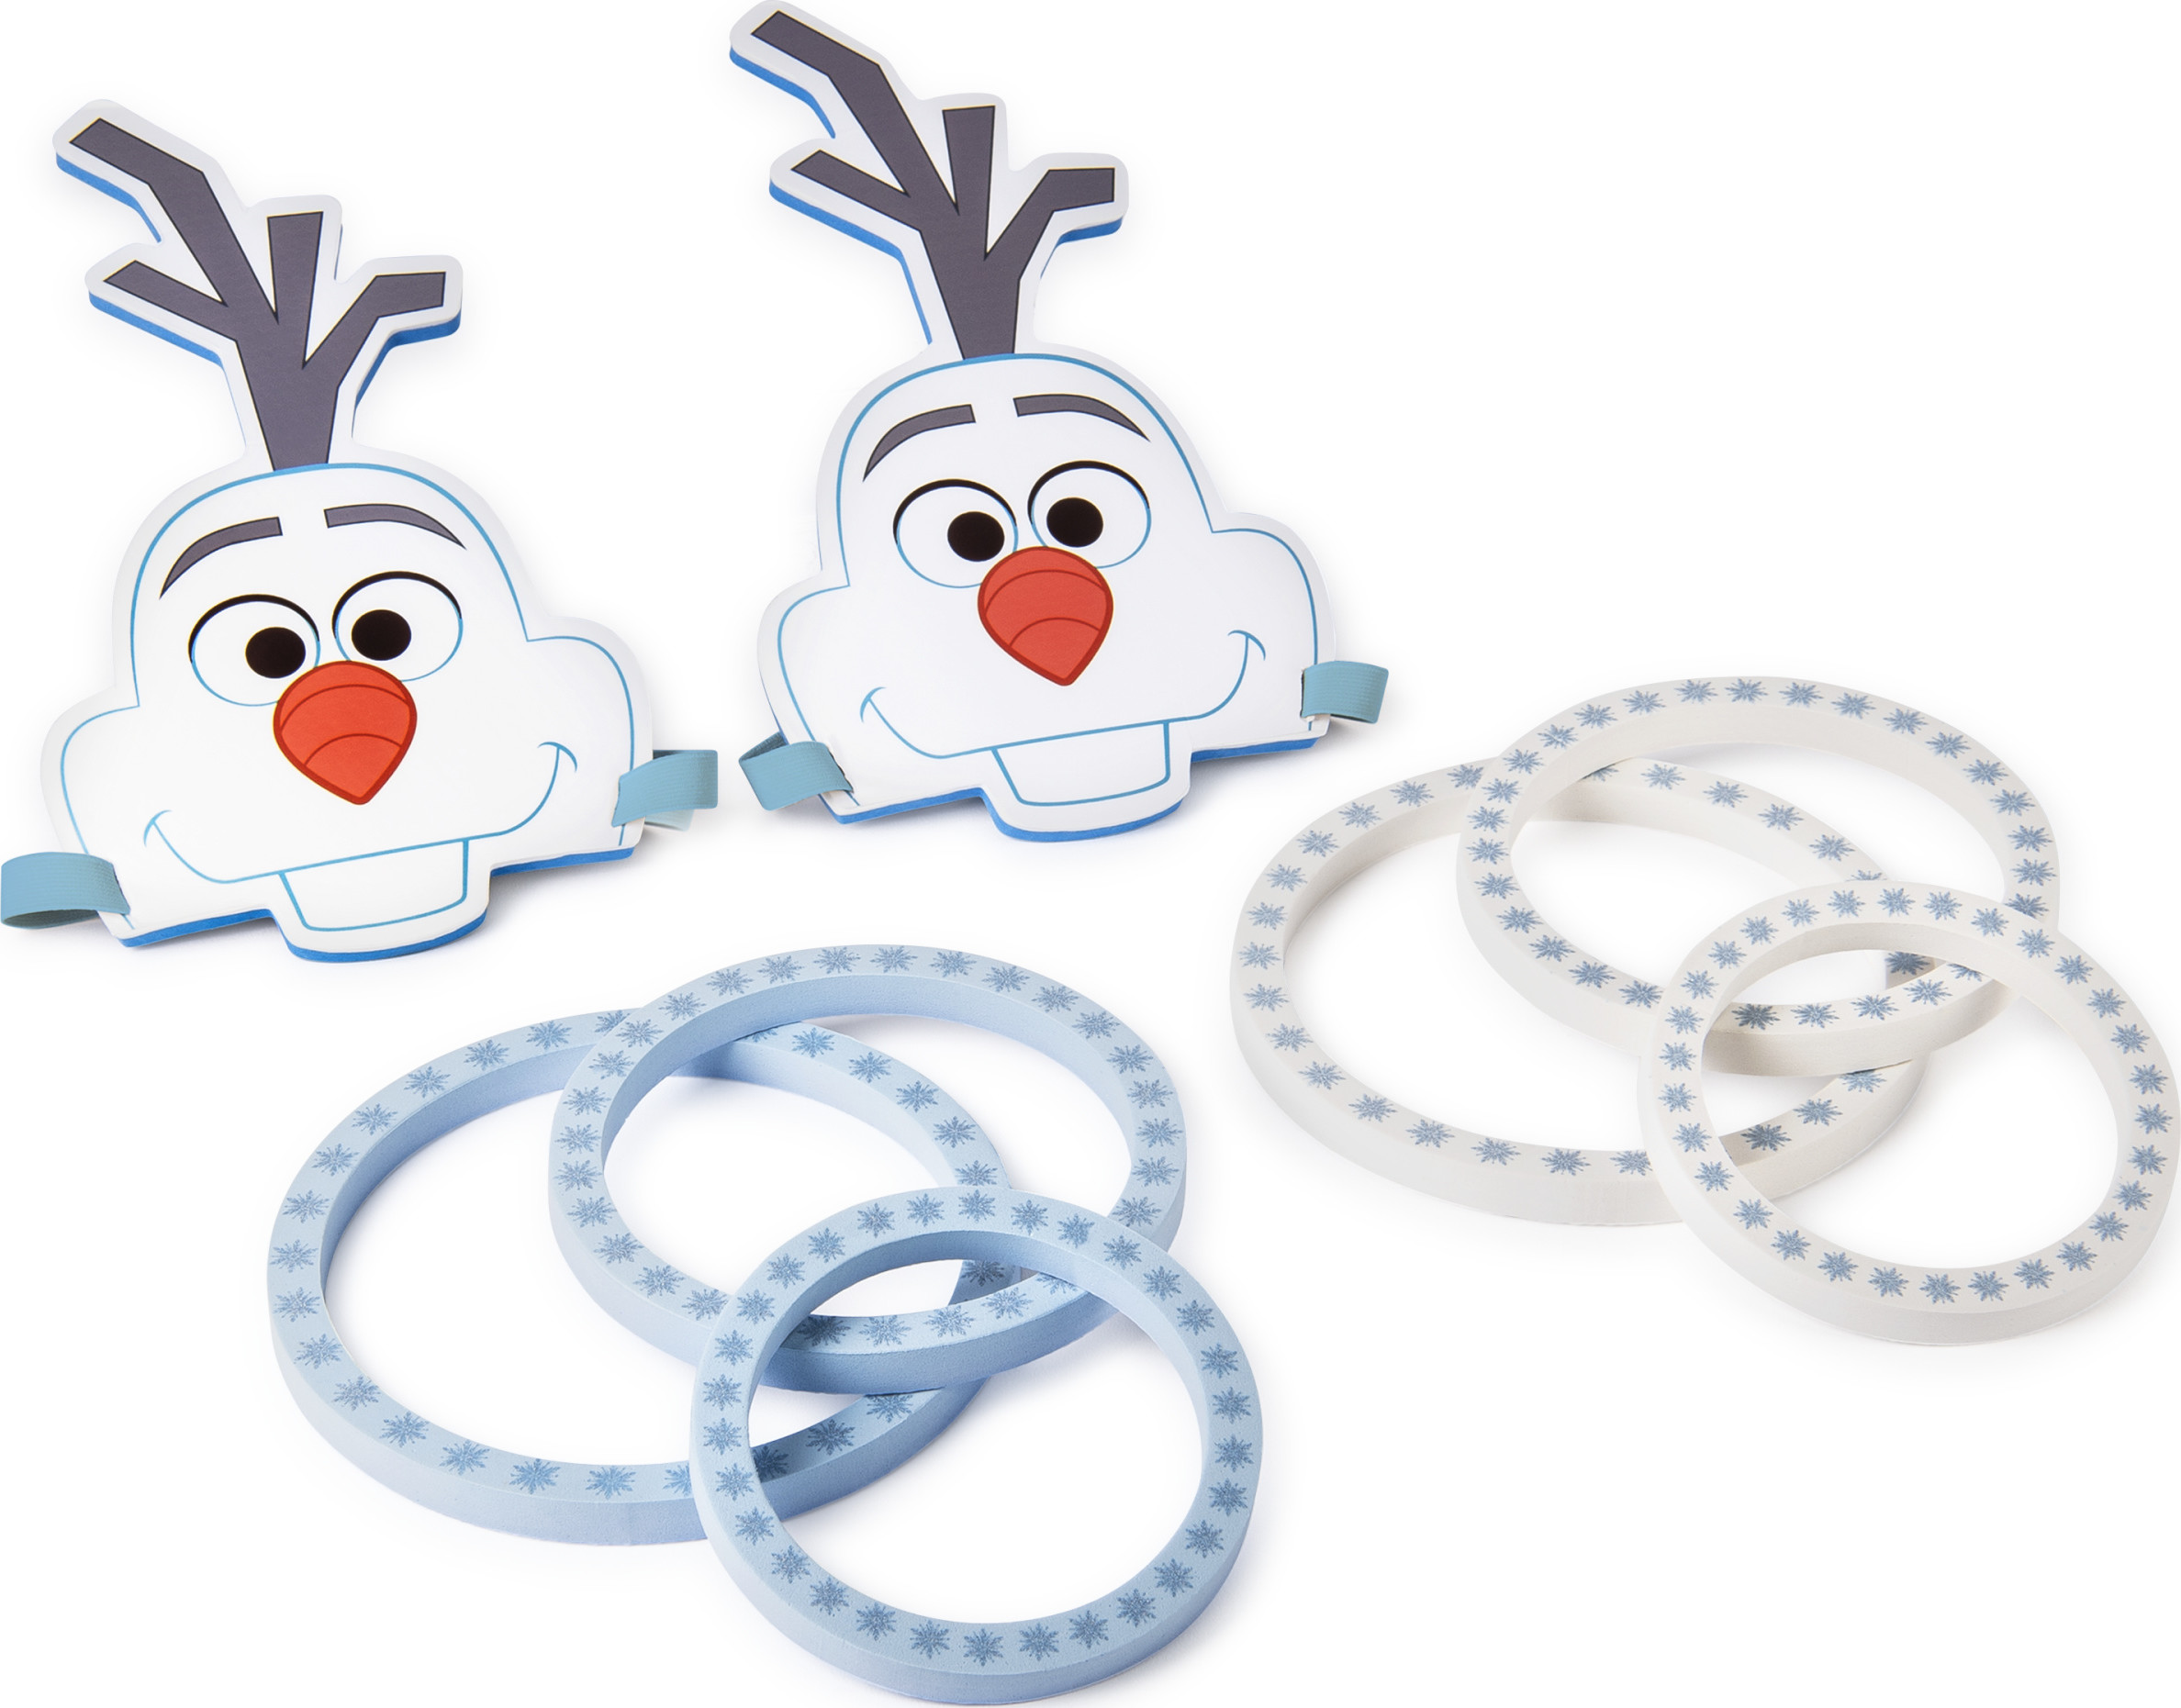 Disney Frozen 2 Up and Active Olaf Snowflake Catch Game for Kids and Families - image 2 of 4